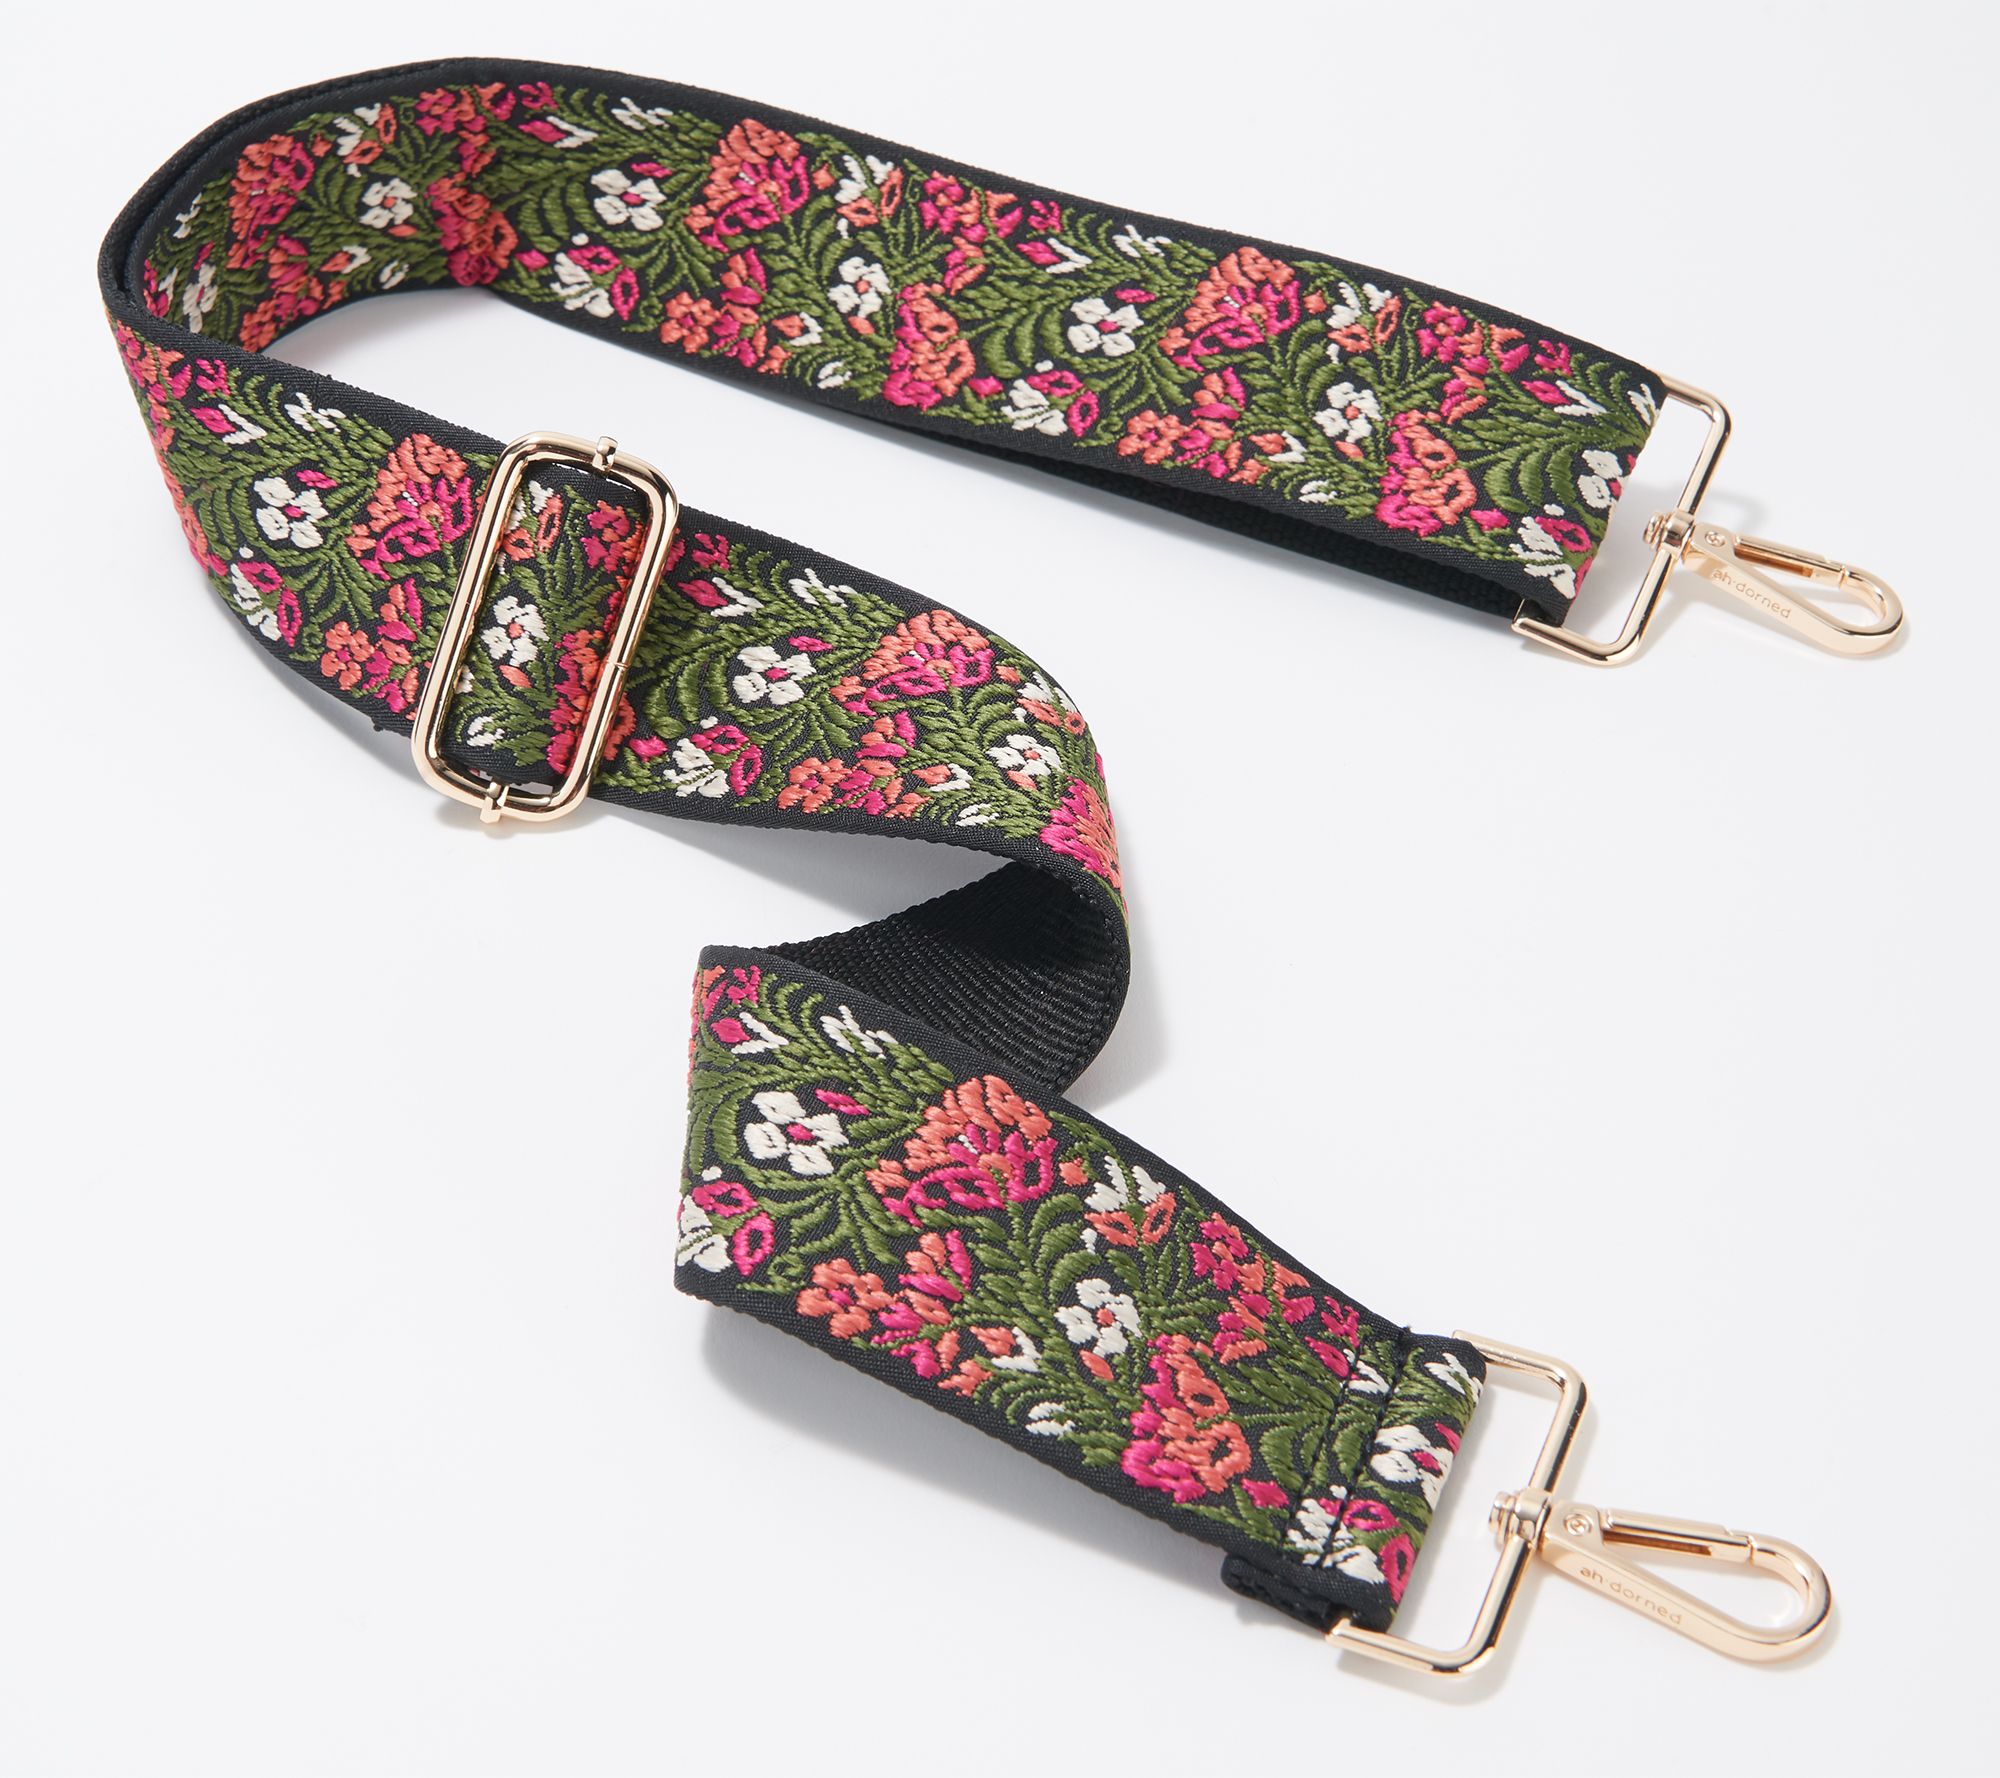 Removable Colorful Bag Strap, Replacement Crossbody Guitar Style Bag Strap,  Flowery Interchangeable Colorful Bag Strap for Handbag, SATURN 